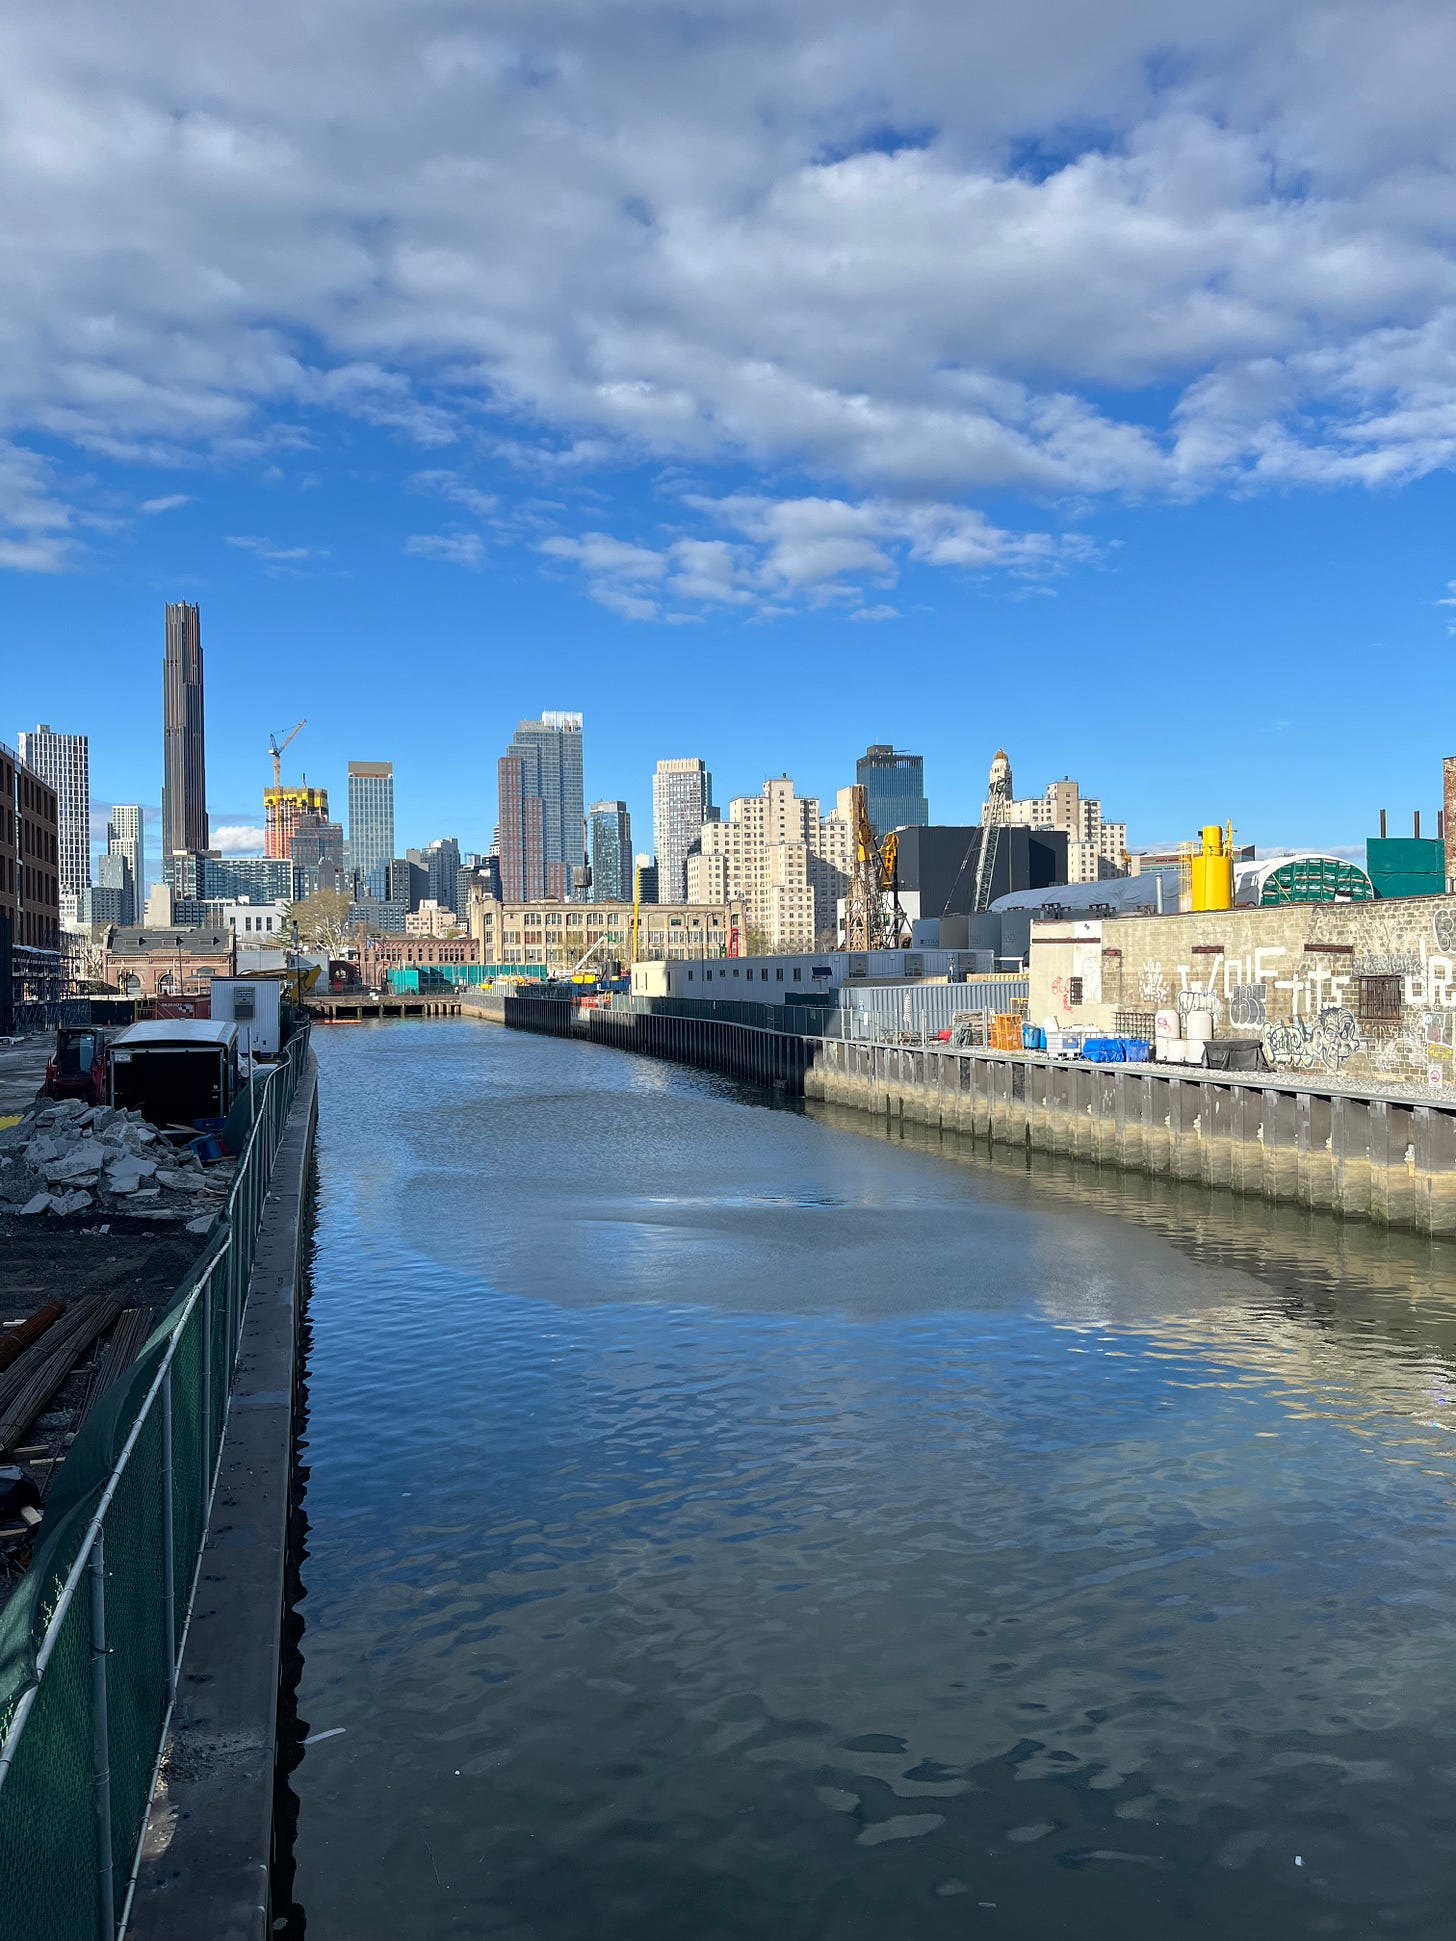 Picture of Gowanus Canal with buildings in the background